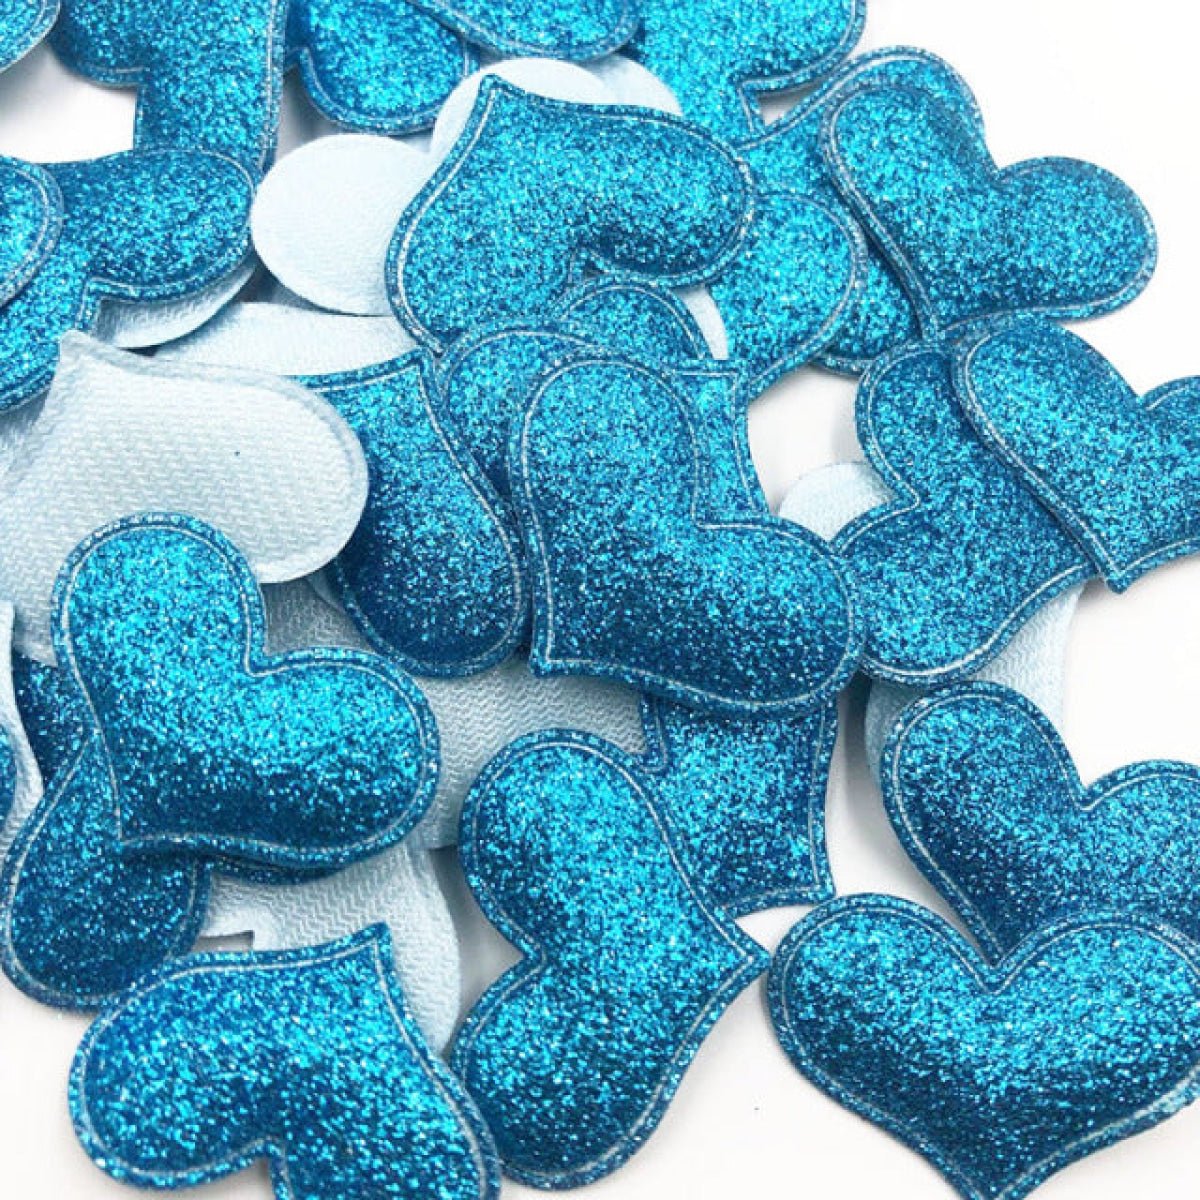 50pcs 35mmx30mm Glitter Padded Heart Felt Patches Appliques For Clothing Sewing DIY Wedding Decoration Toy Craft Shapes PU Leather - Dark Blue - - Asia Sell